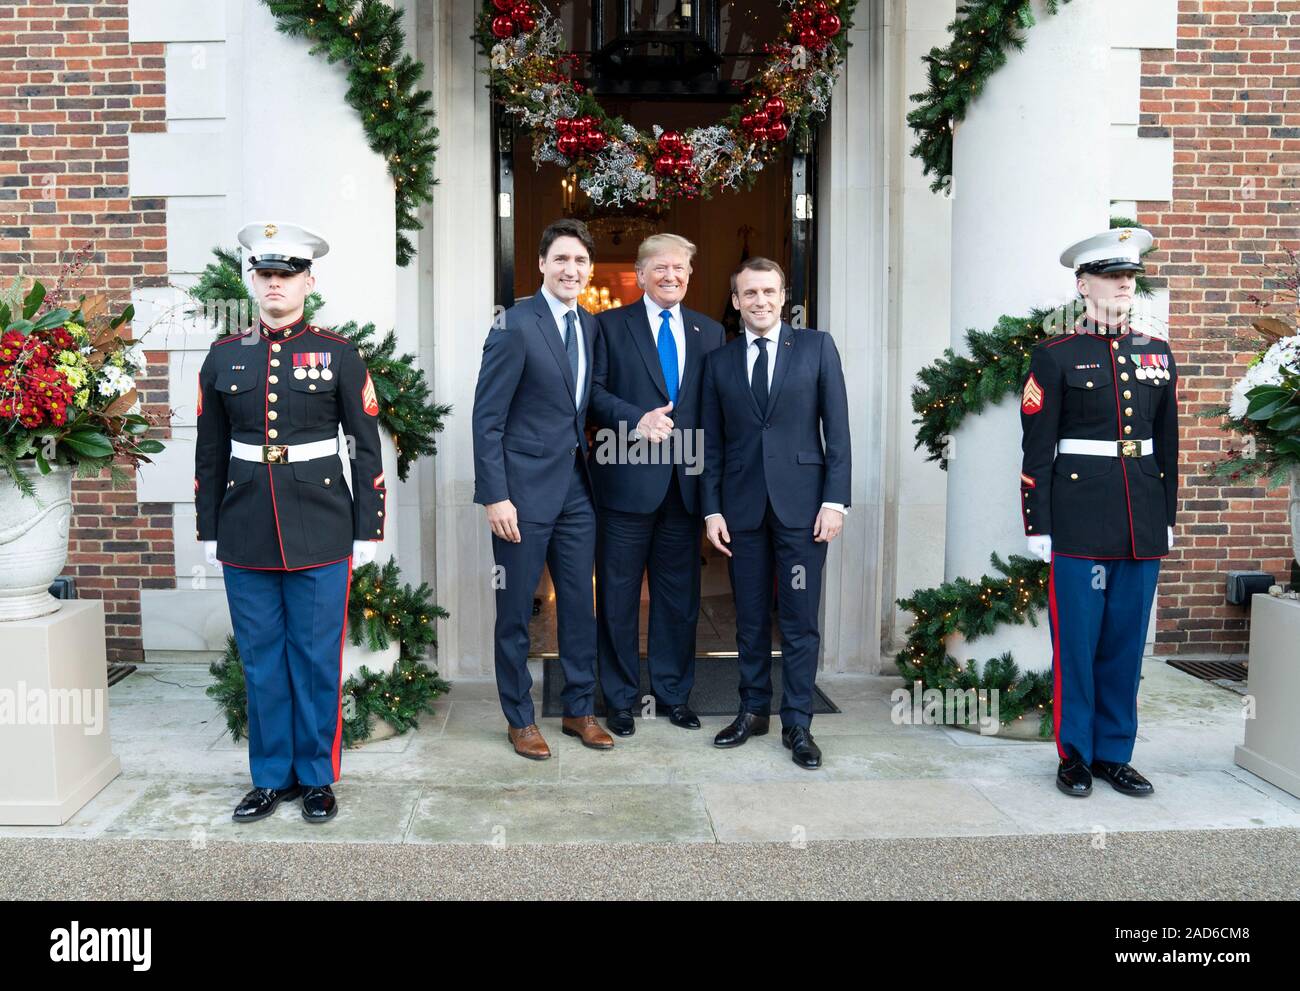 London, UK. 03 December, 2019. U.S. President Donald Trump stands with Canadian Prime Minister Justin Trudeau, left, and French President Emmanuel Macron, right, at the entrance to Winfield House December 3, 2019 in London, UK.  Credit: Shealah Craighead/Planetpix/Alamy Live News Stock Photo